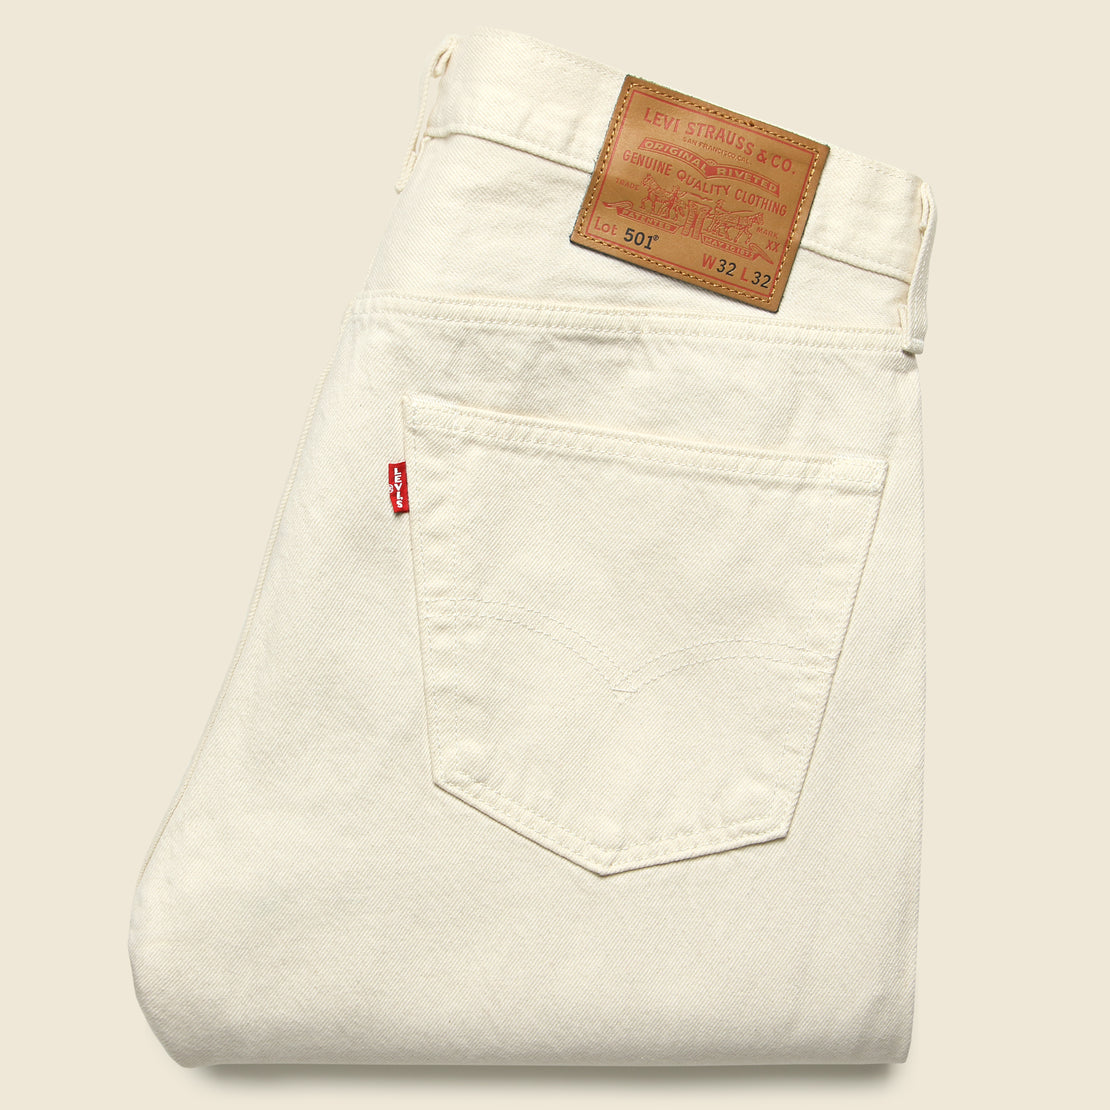 501 Straight Jean - My Candy - Levis Premium - STAG Provisions - Pants - Denim